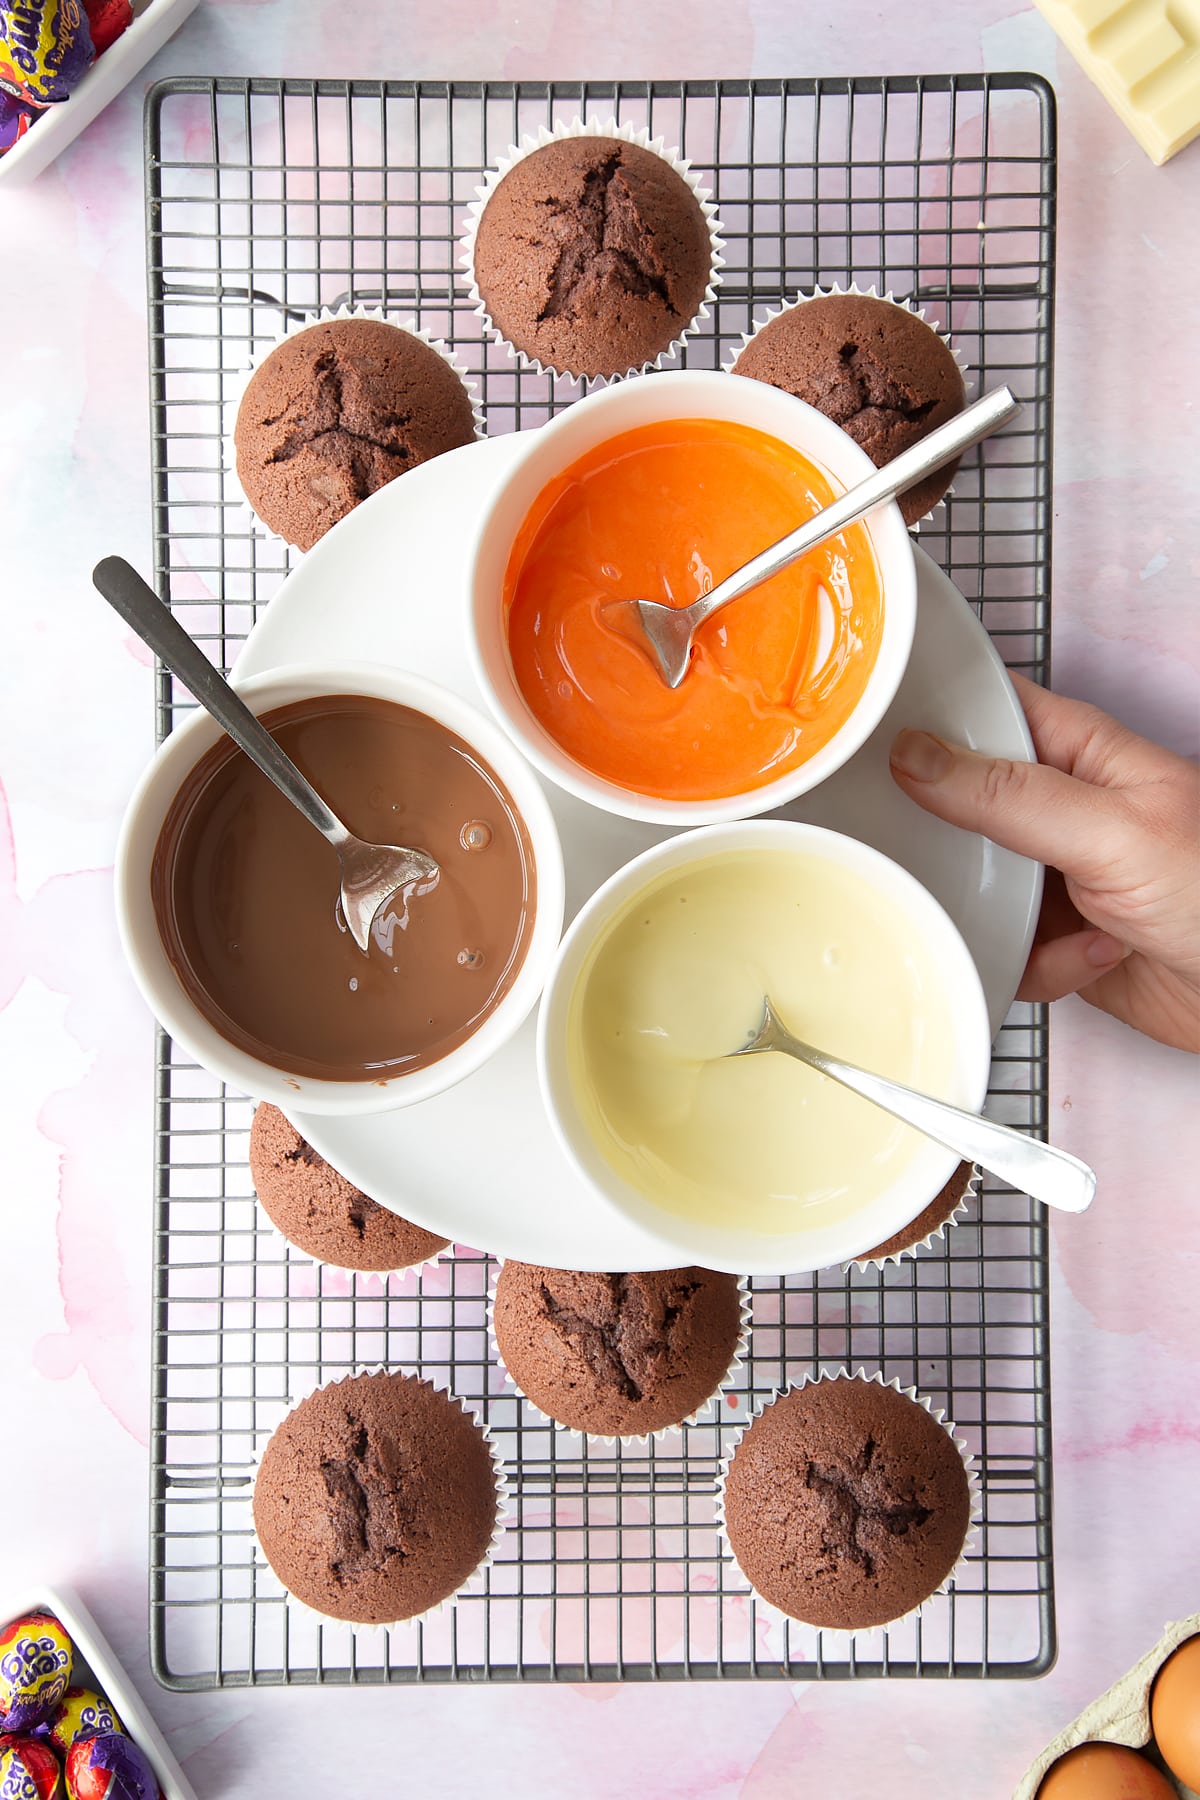 Three bowls of melted chocolate, one white, one orange and one milk. Below are chocolate cupcakes on a cooling rack.